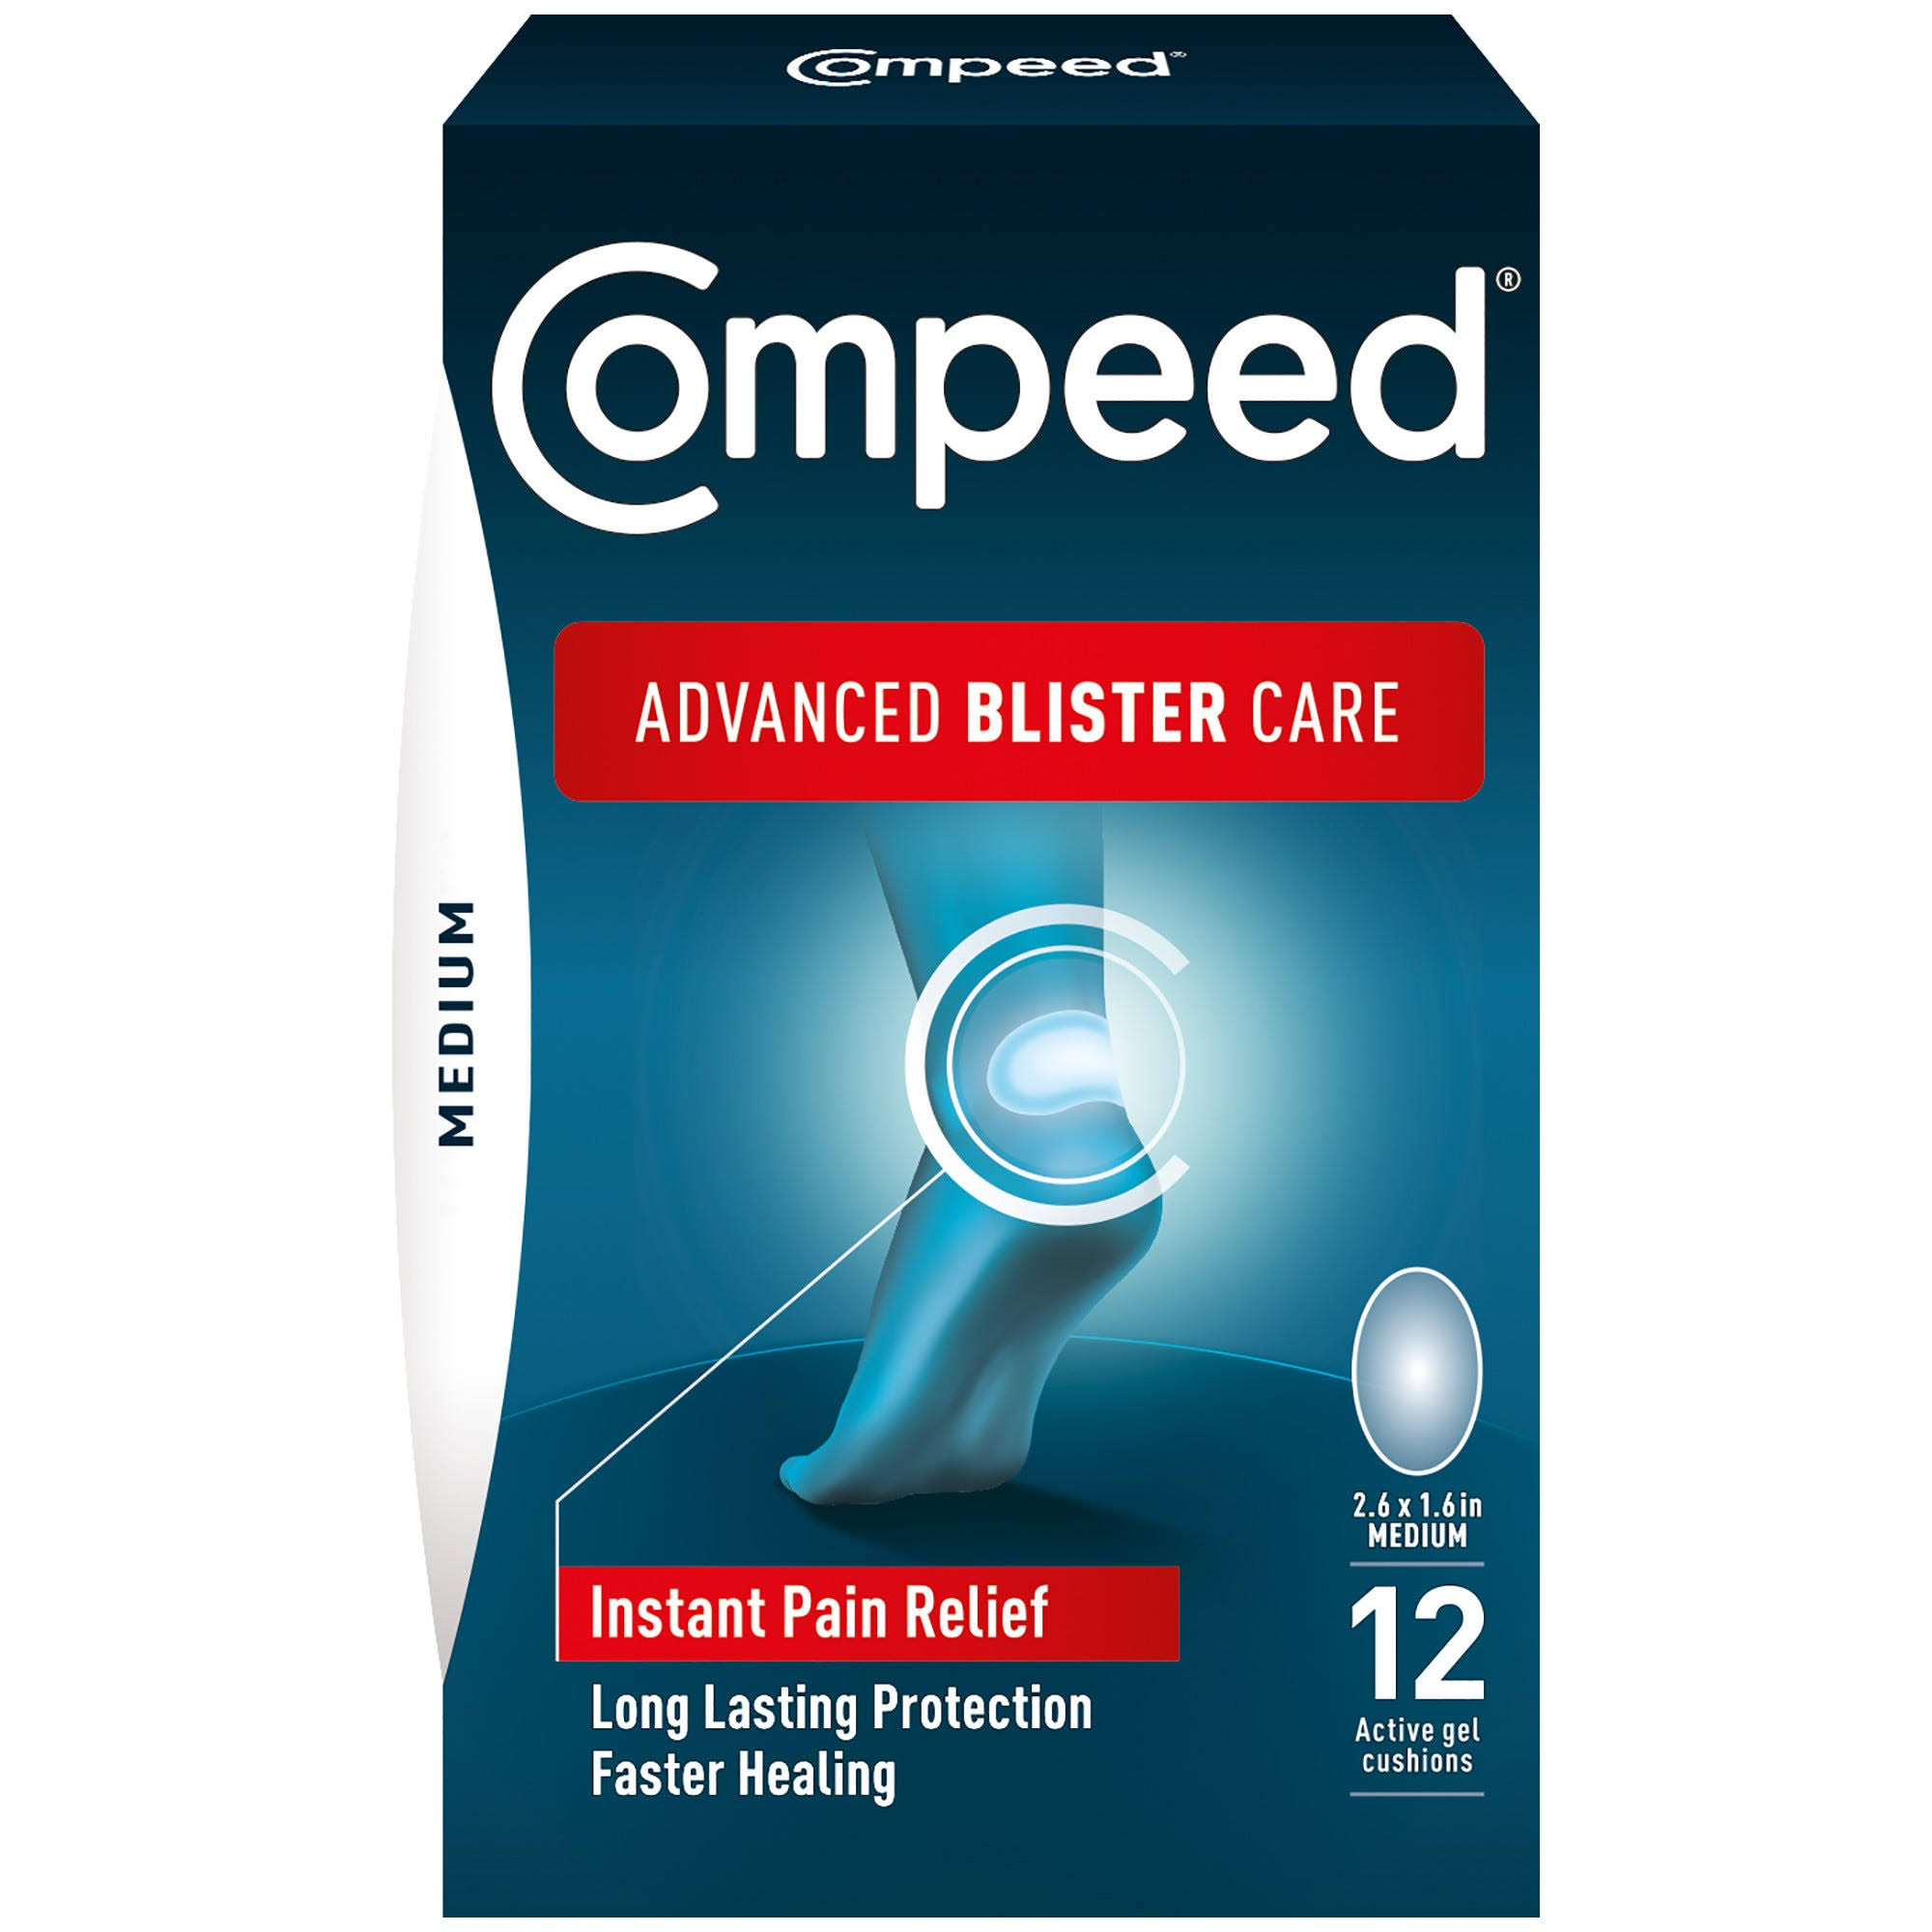 Compeed Advanced Blister Care Gel Cushions Medium - 12 Ct Compeed